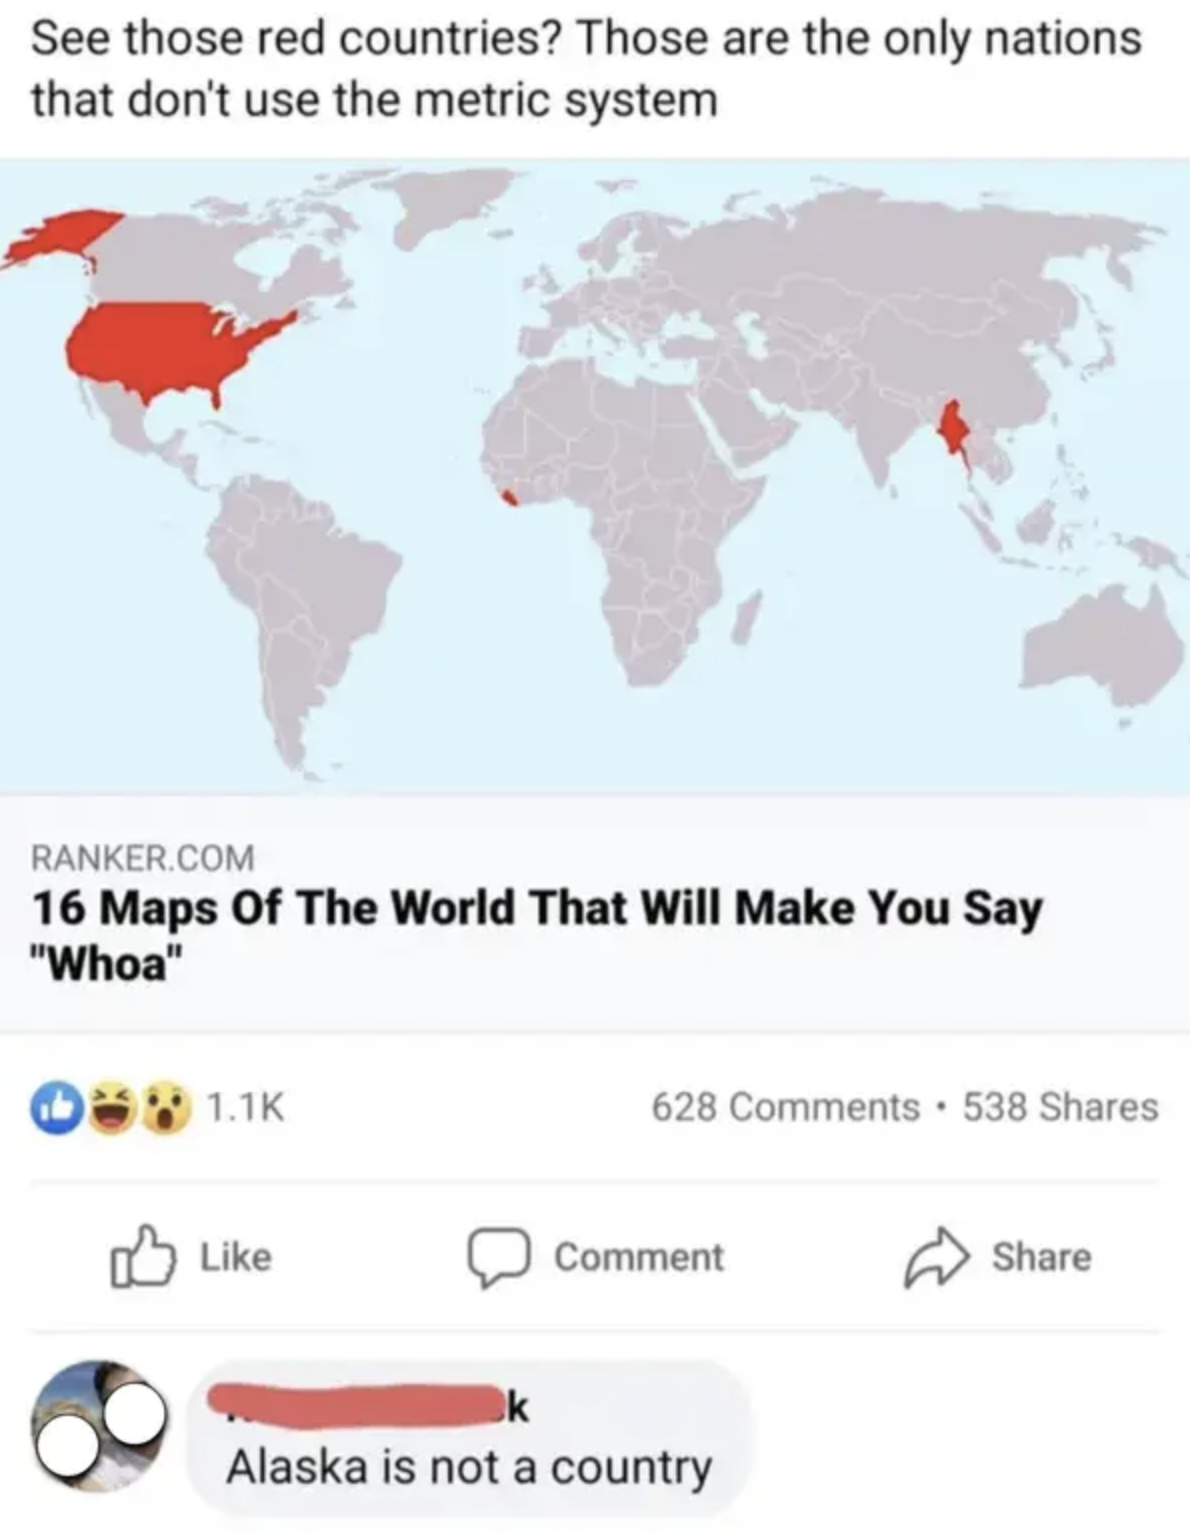 map of the world with countries not using the metric system highlighted red and a guy replies alaska is not a country